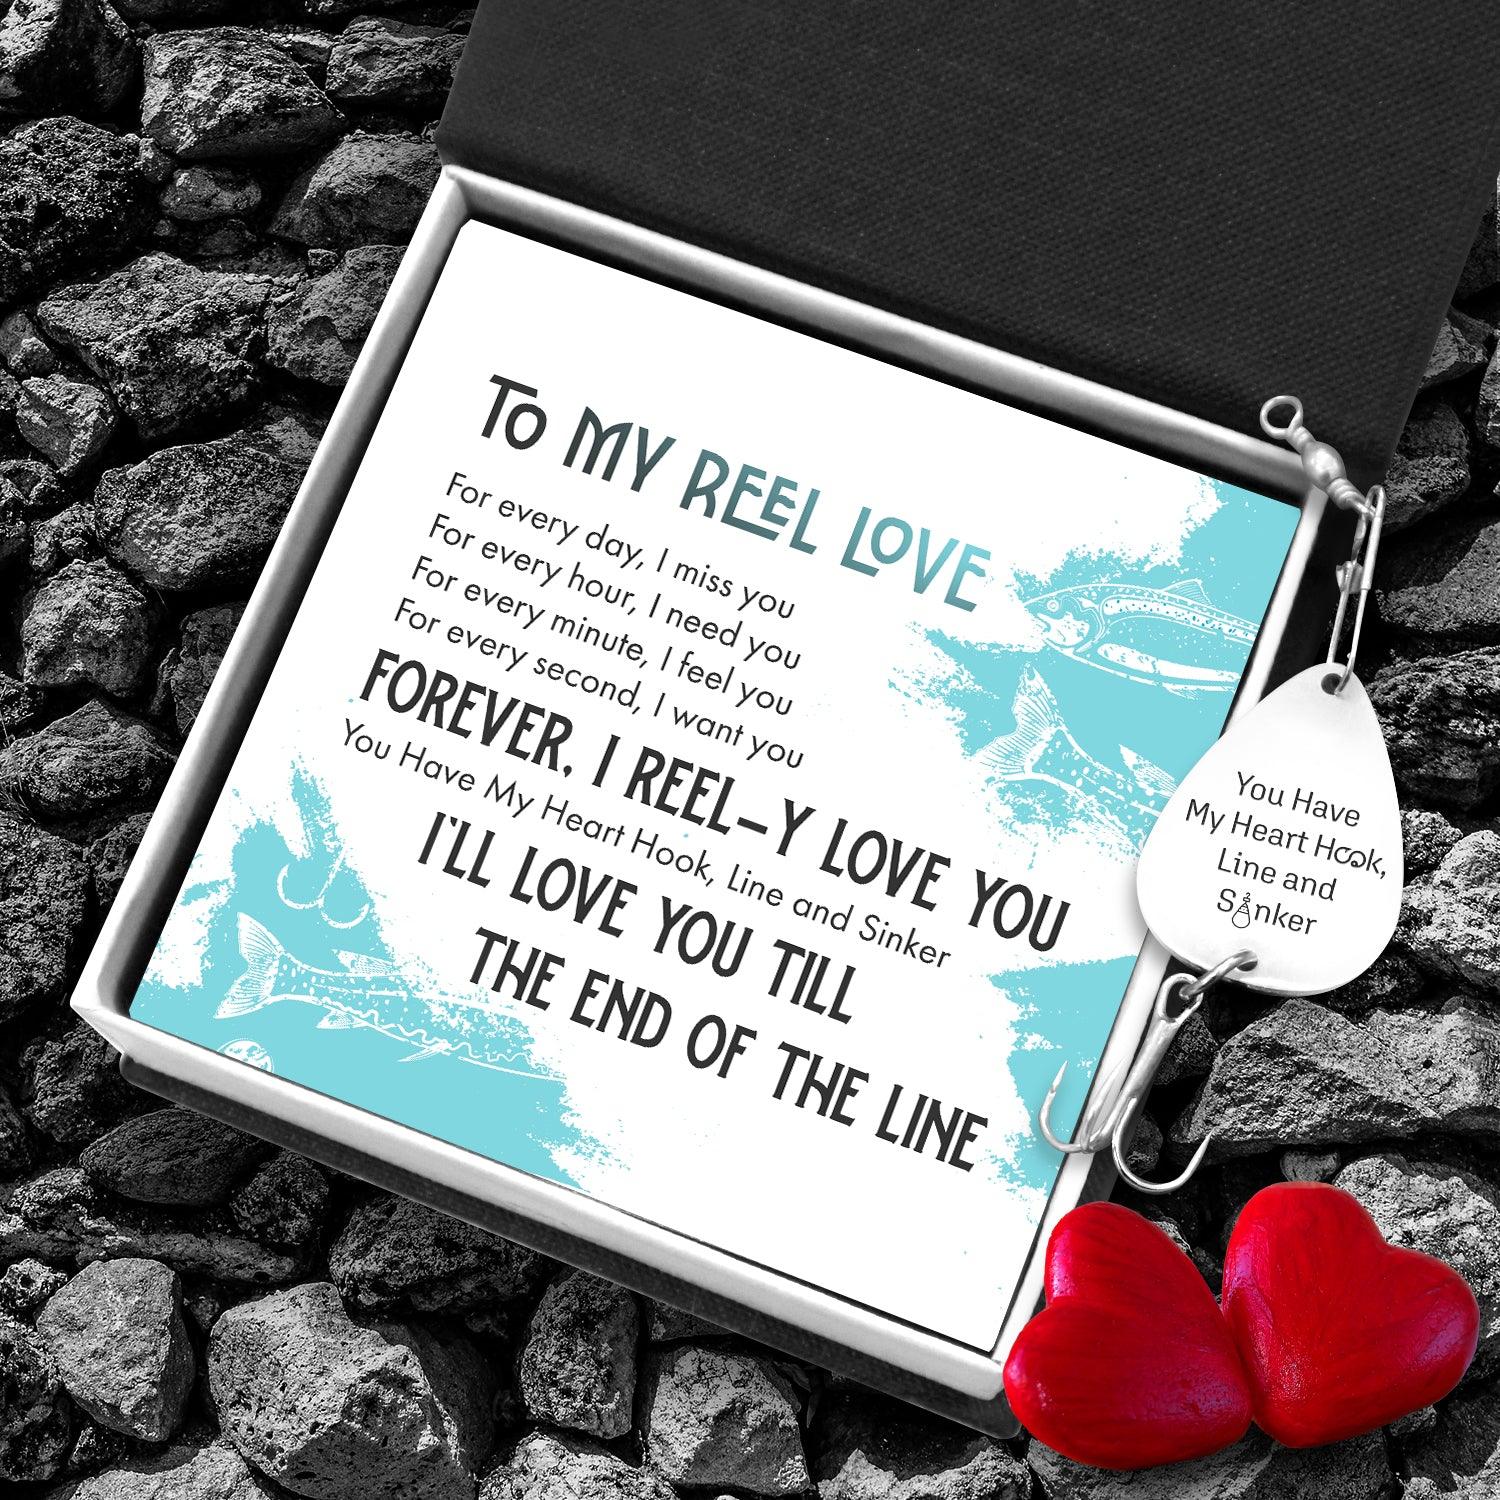 Engraved Fishing Hook - To My Reel Love - Forever, I Reel-y Love You - Augfa13007 - Gifts Holder